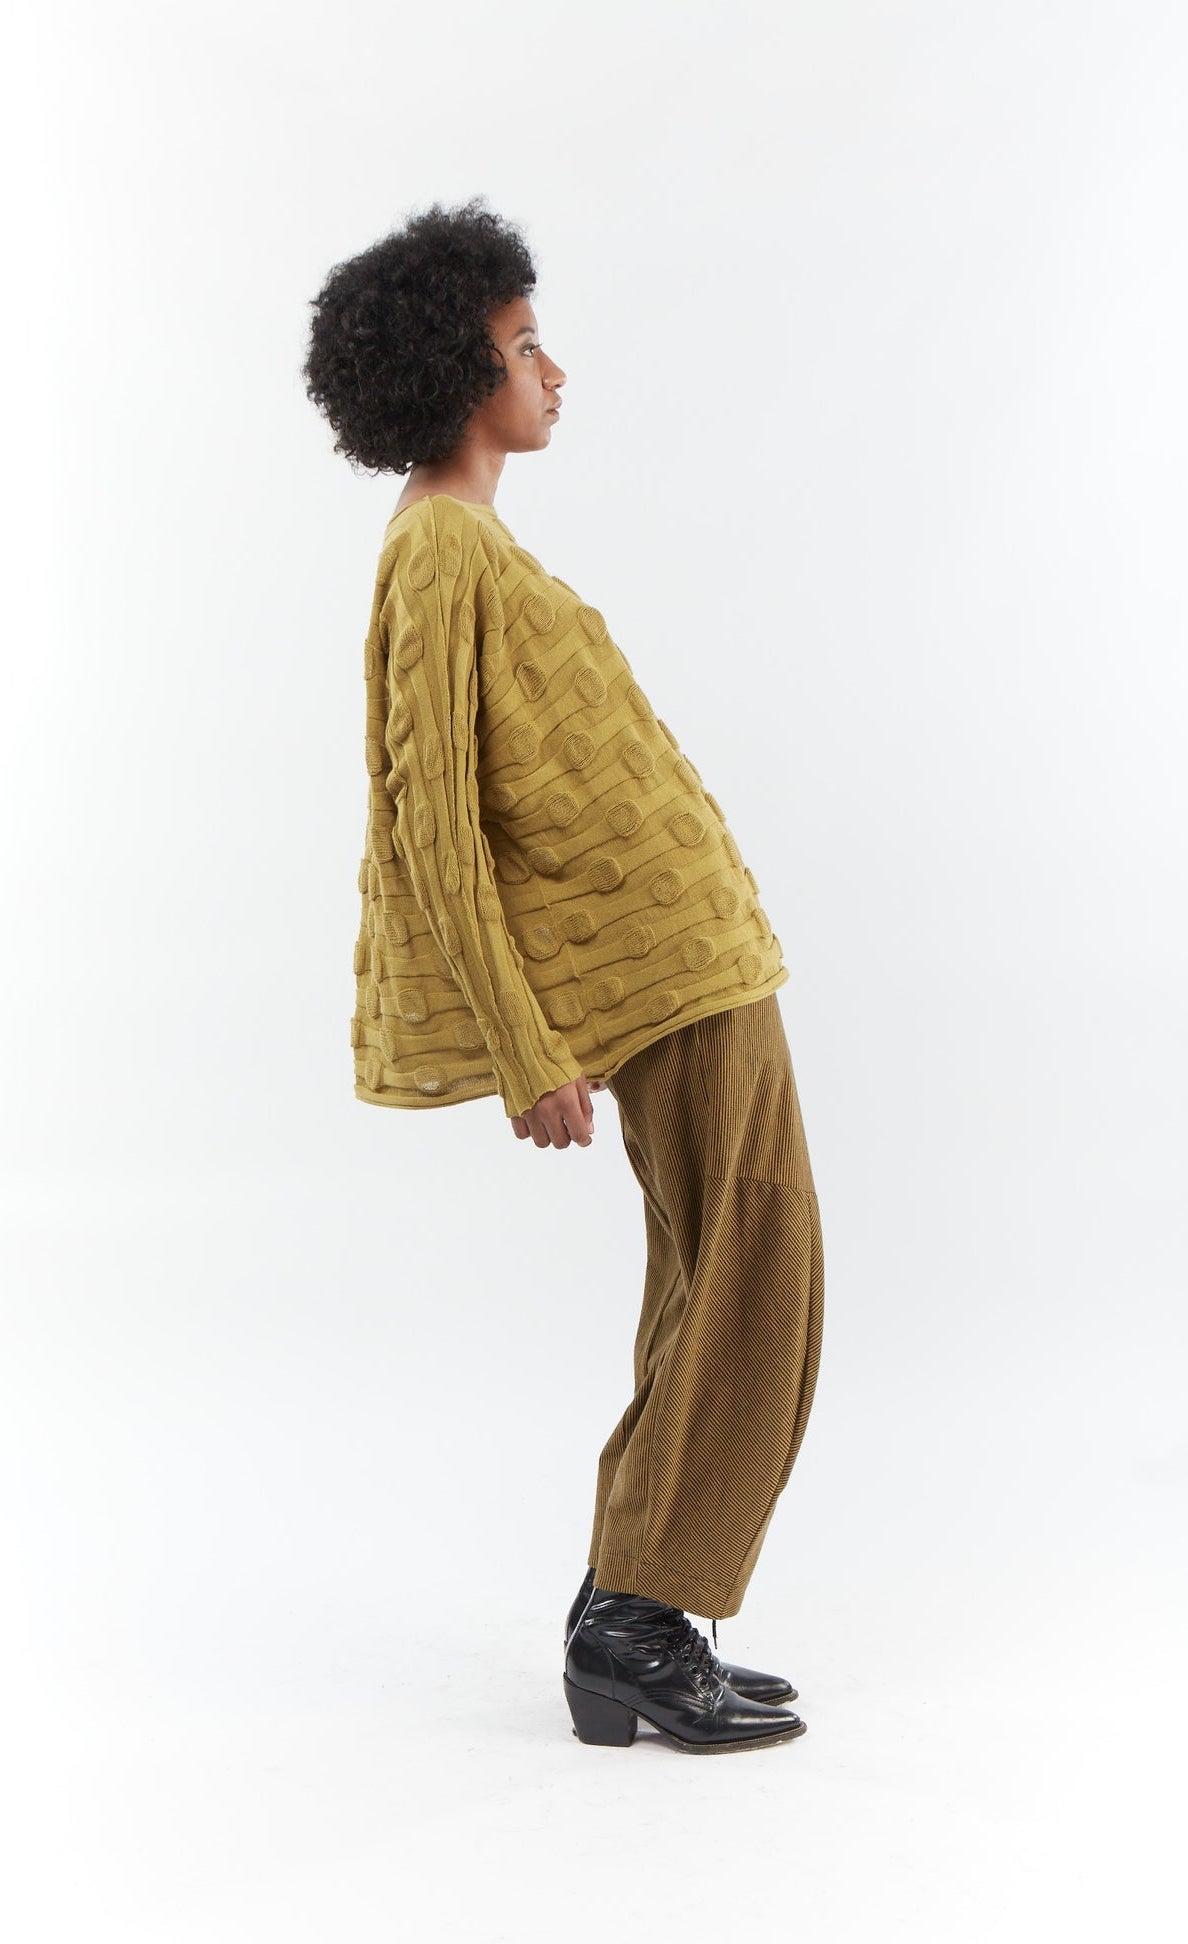 Right side full body view of a woman wearing the mxmatthildur bubble sweater and the matching mustard and black striped pants. This sweater features a bubble/jacquard textured fabric print, long sleeves, a boxy shape, and a boat neck.